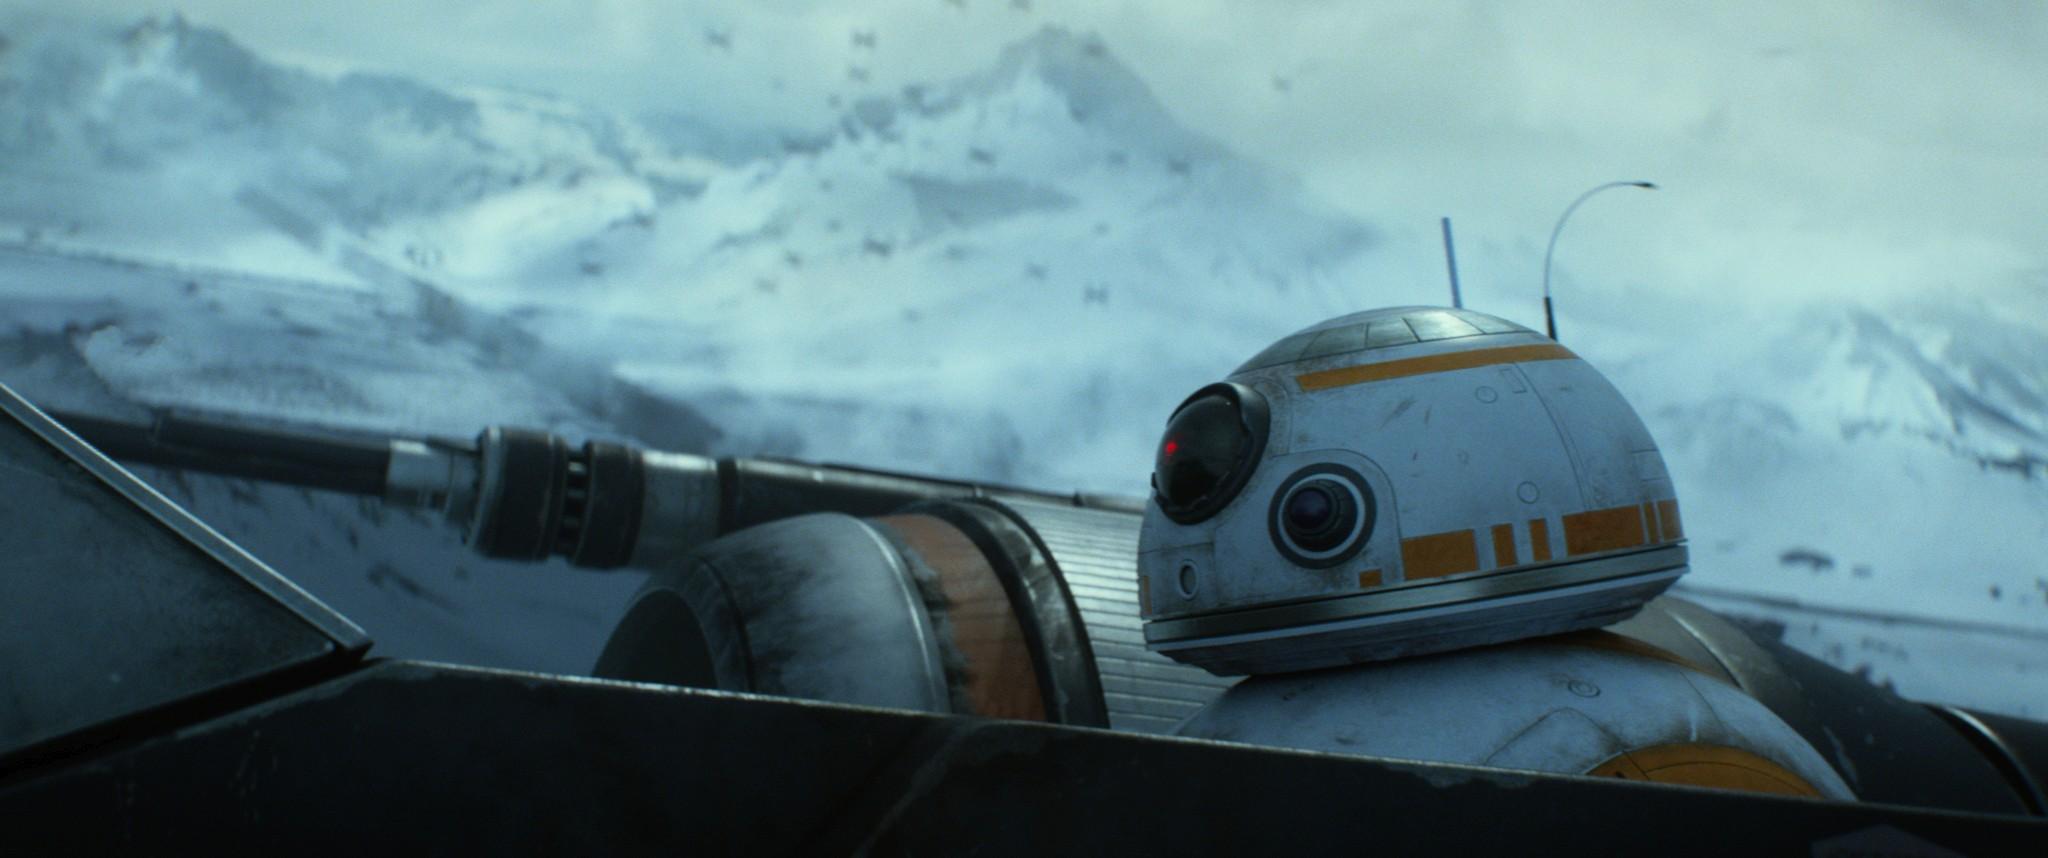 Star Wars Episode VII: The Force Awakens Wallpaper and Background